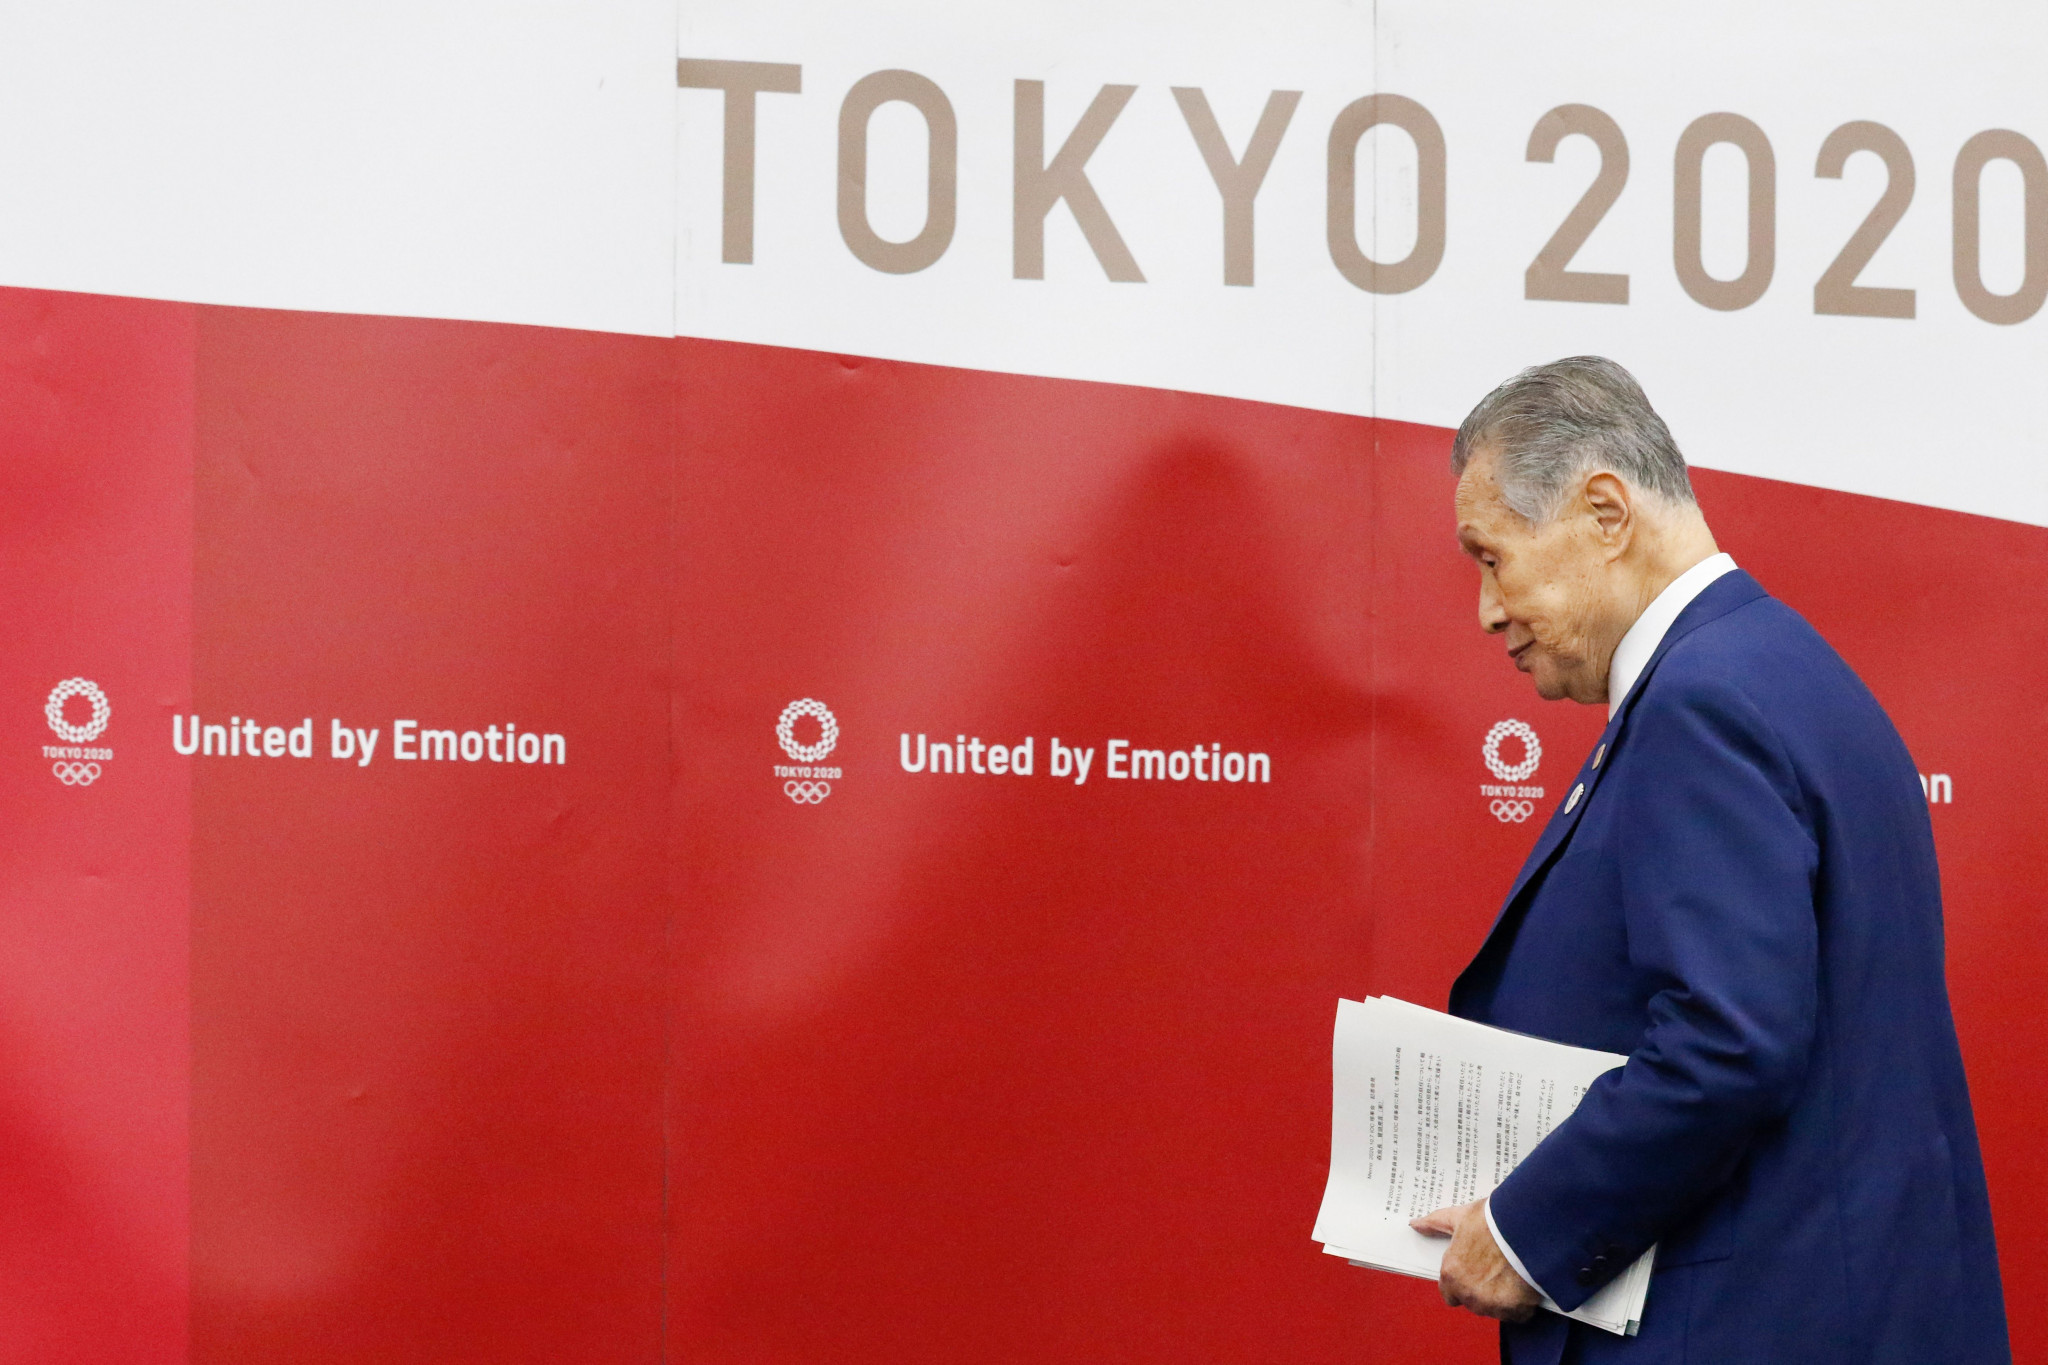 Tokyo 2020 presented to the IOC Executive Board today ©Getty Images